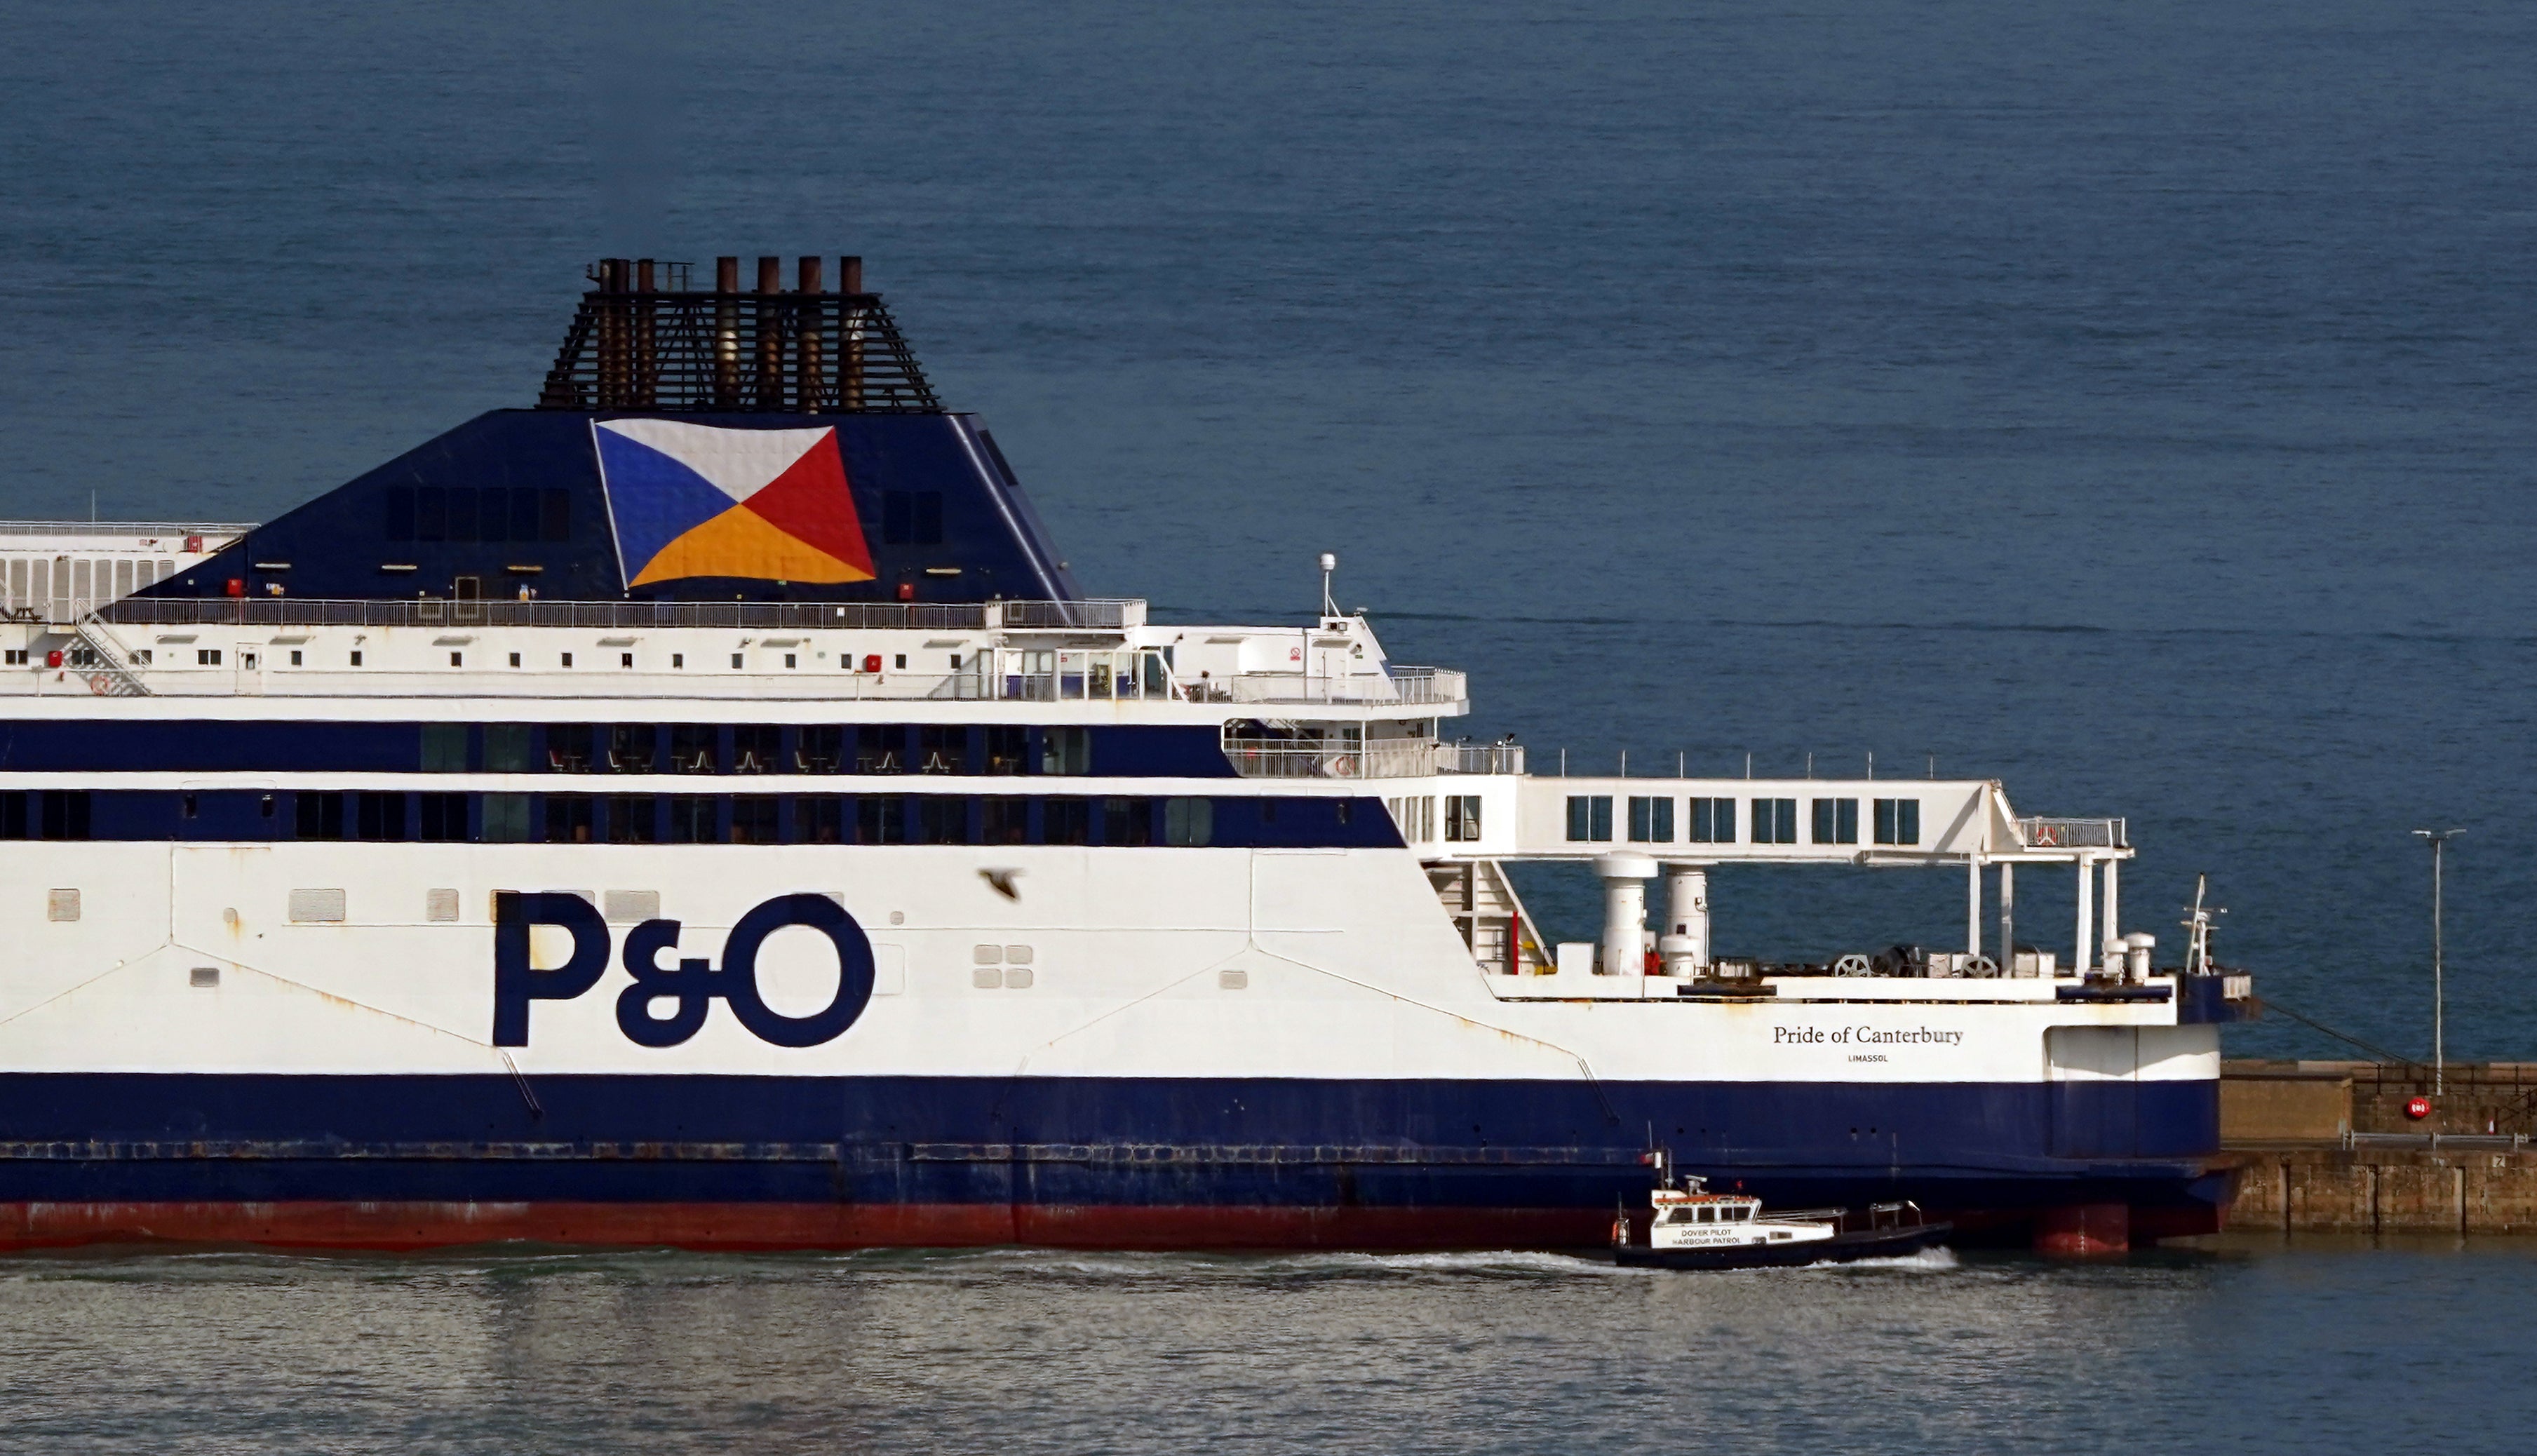 The boss of P&O Ferries has insisted he will not reverse the decision to sack nearly 800 seafarers despite being given ‘one further opportunity’ by Transport Secretary Grant Shapps (Gareth Fuller/PA)